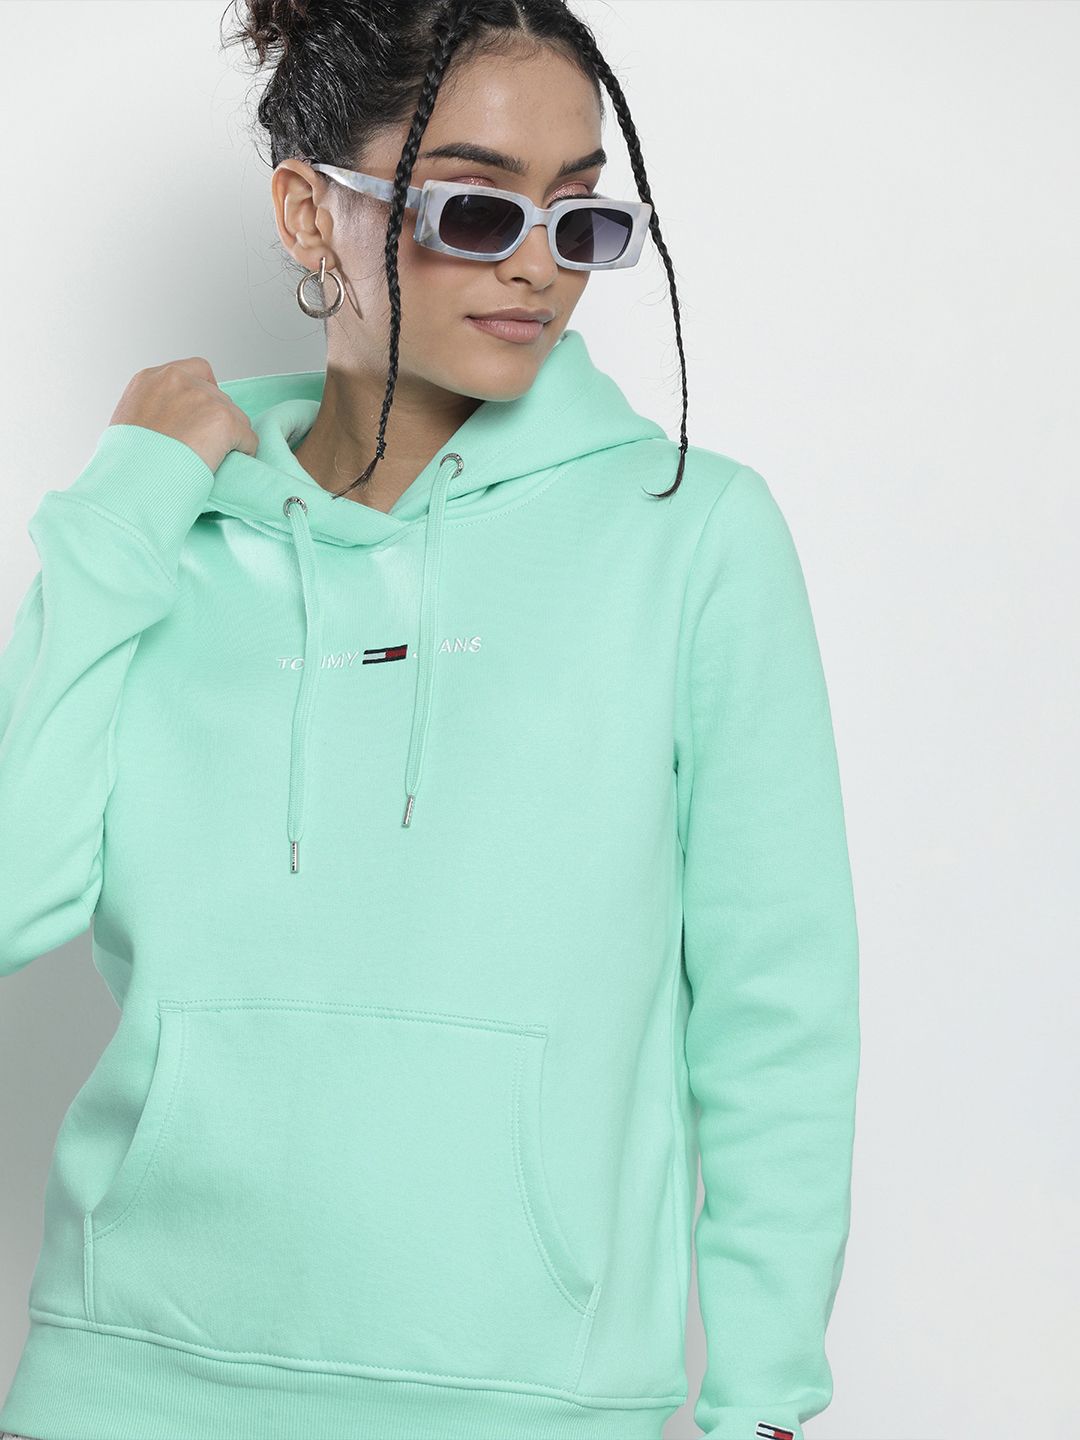 Tommy Hilfiger Women Sea Green Embroidered Hooded Sweatshirt Price in India